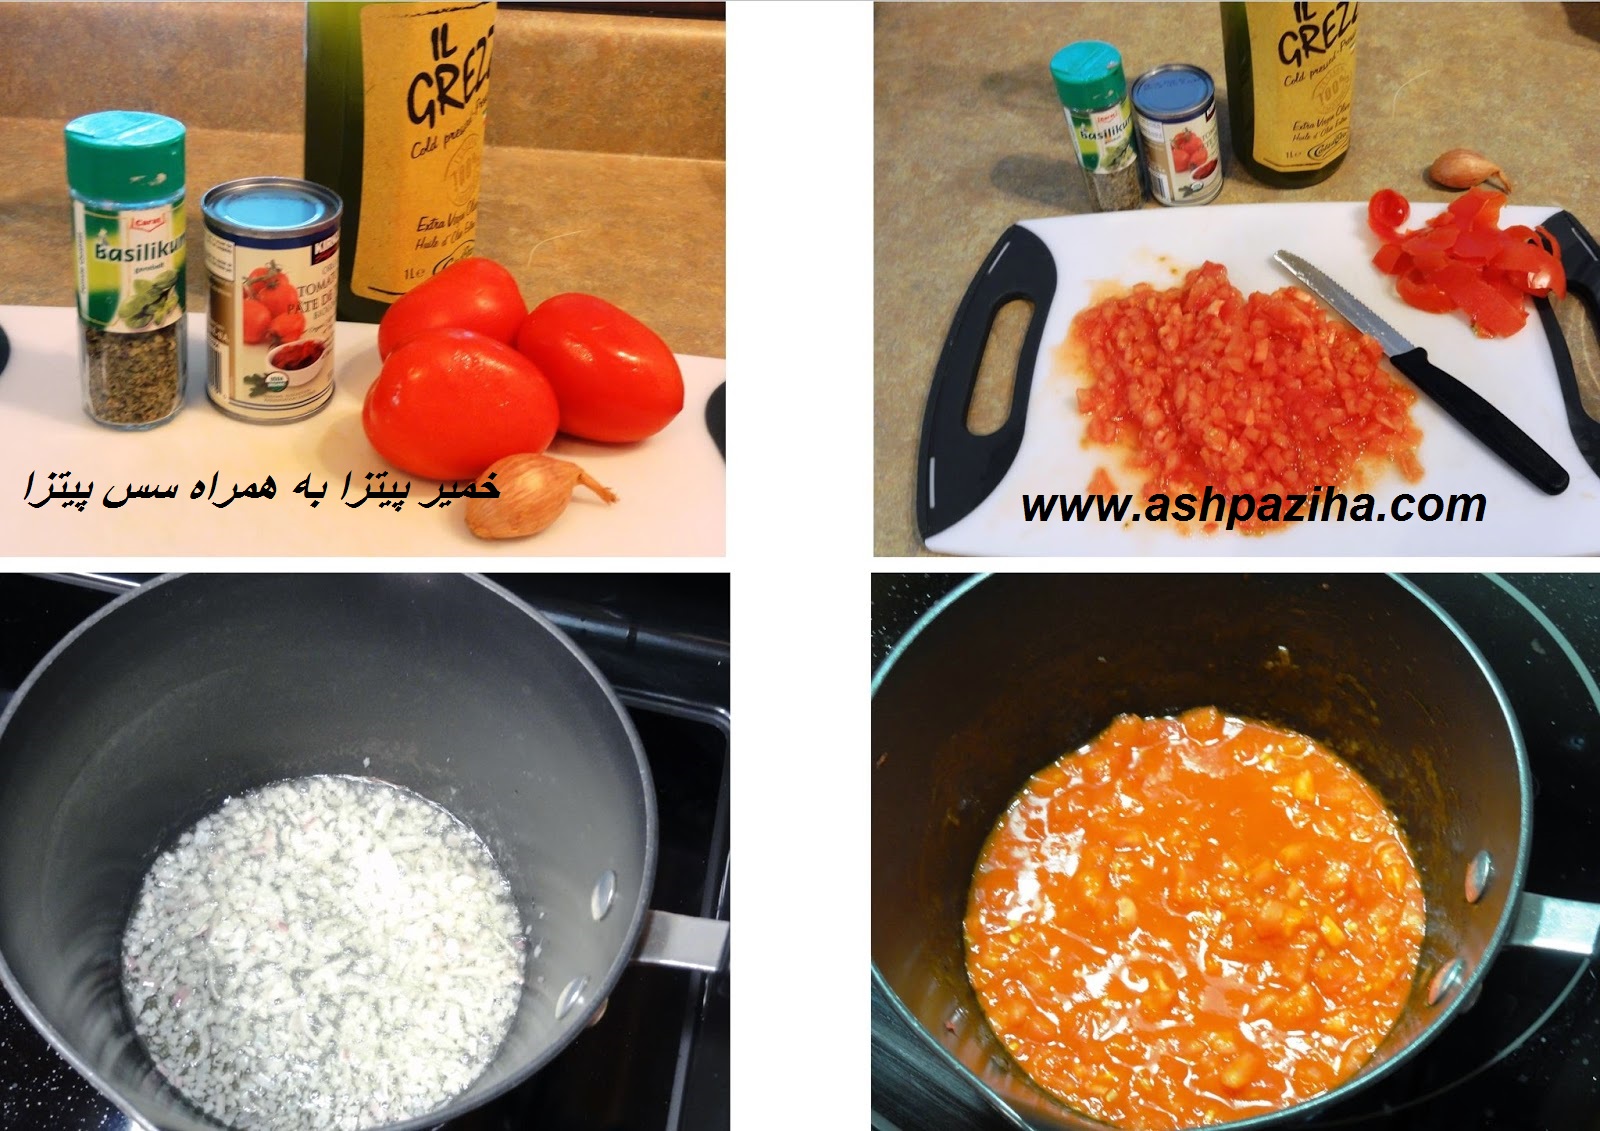 How to - the - dough pizza - with - Sauces - Pizza (7)